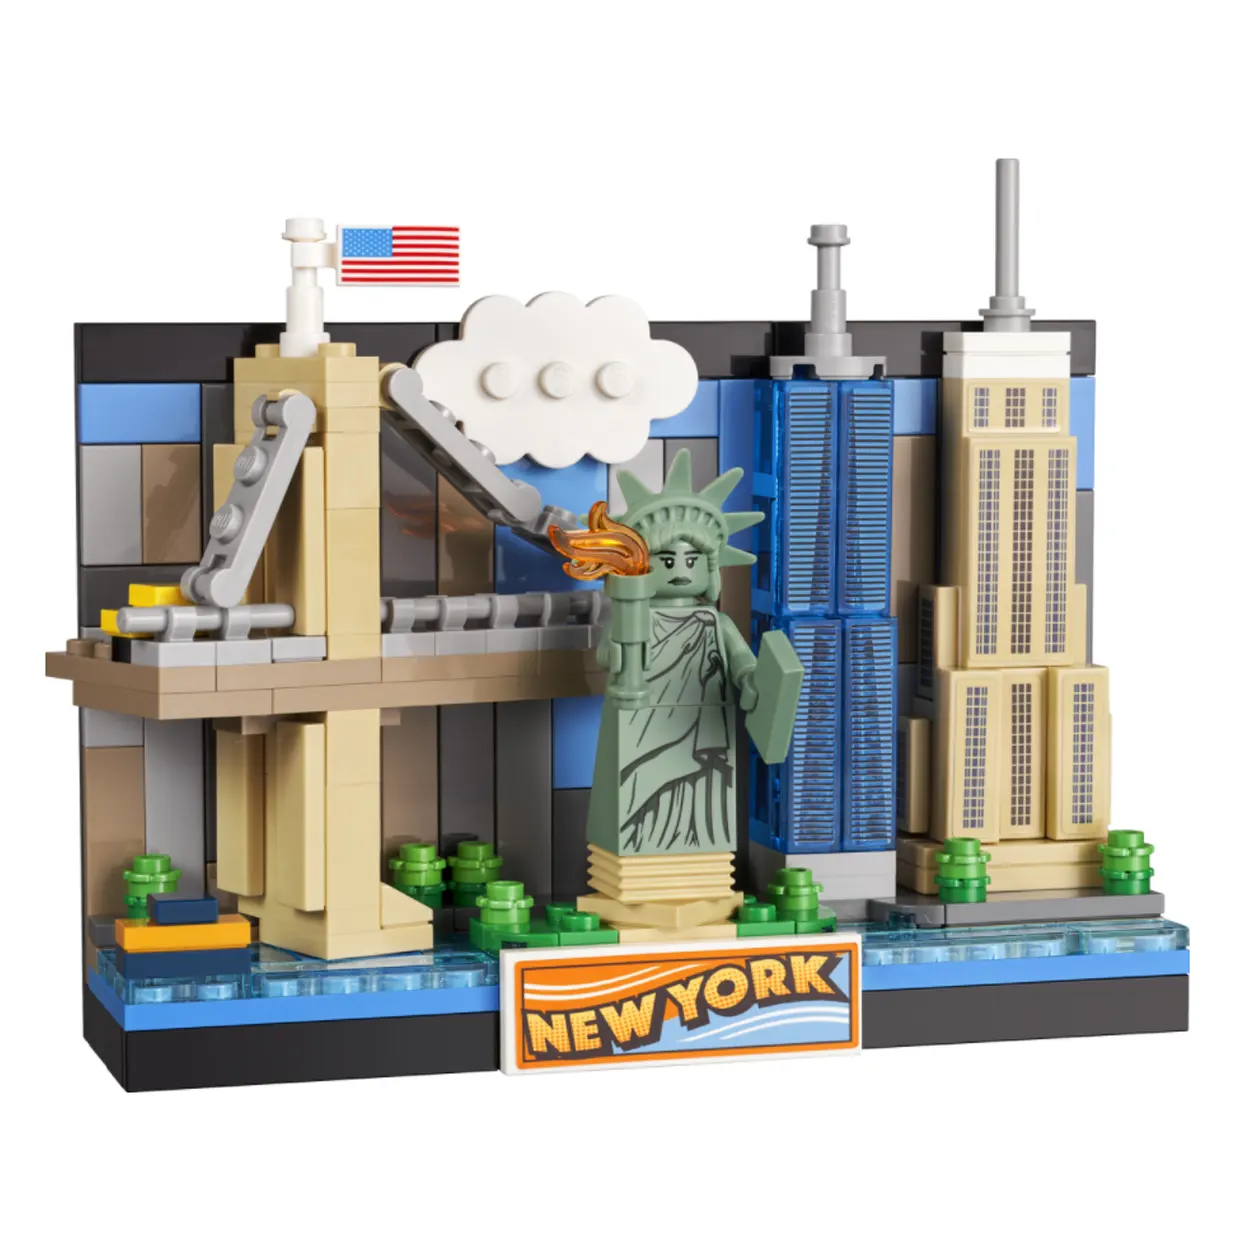 LEGO Postcard New Sets New York and Beijing for Jan. 1st 2022 Revealed | New Brand for Creator